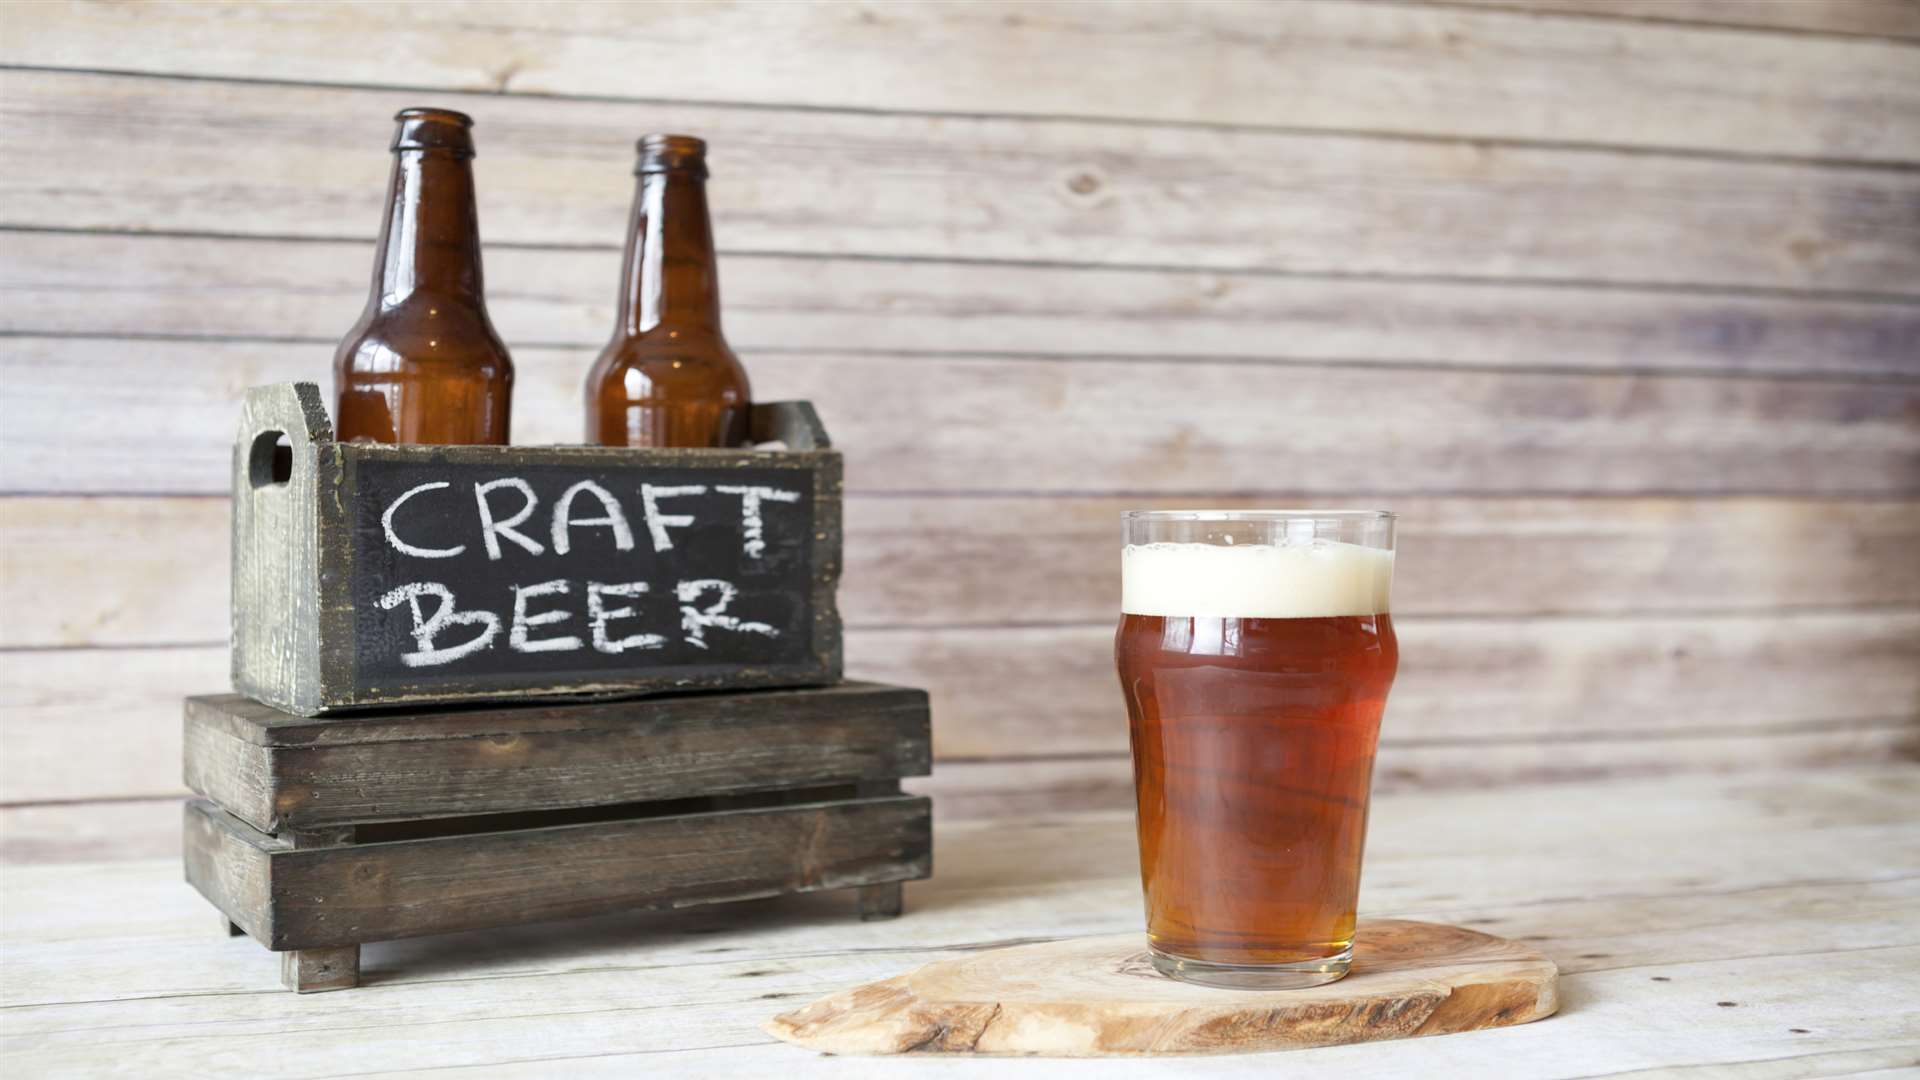 Craft beer makers in Kent are signing up to an initiative to make it clear their products come from independent breweries